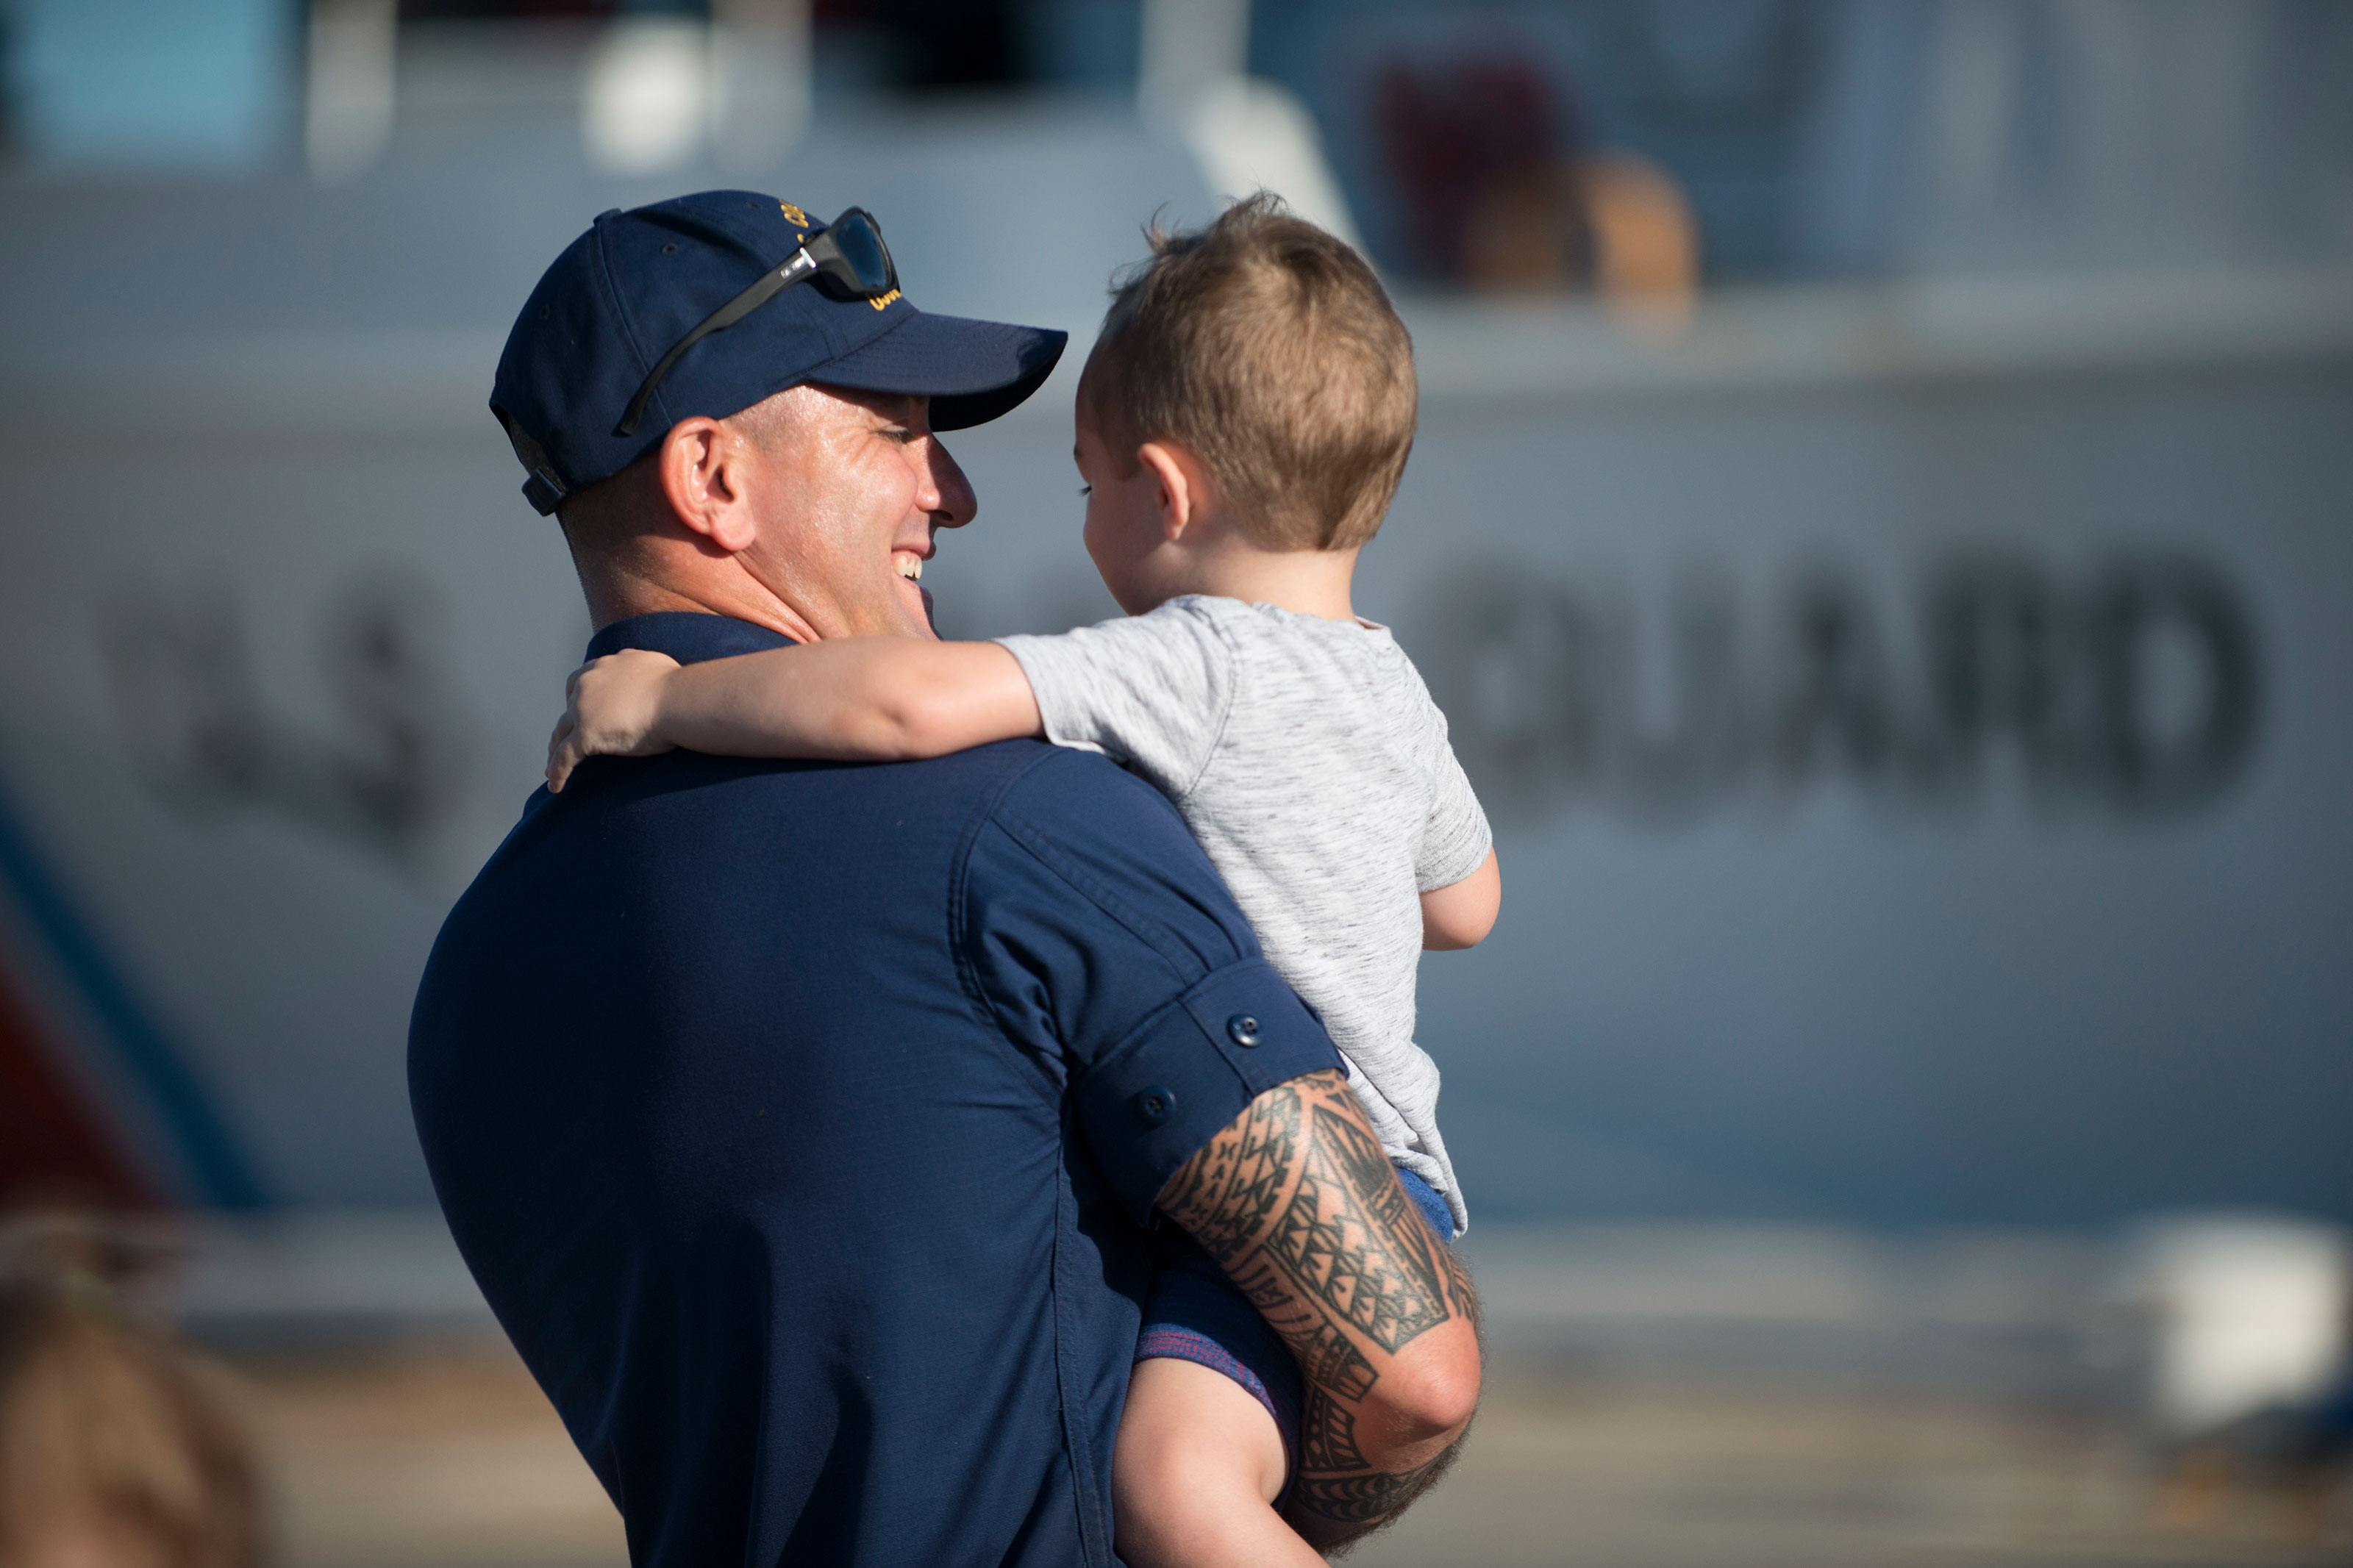 A Coast Guard Cutter Valiant crewmember hugs his child Friday, Sept. 29, 2017, at Naval Station Mayport, Florida. The Valiant crew returned to homeport after a 60-day multi-mission patrol in the Caribbean. (U.S. Coast Guard/Ryan Dickinson)